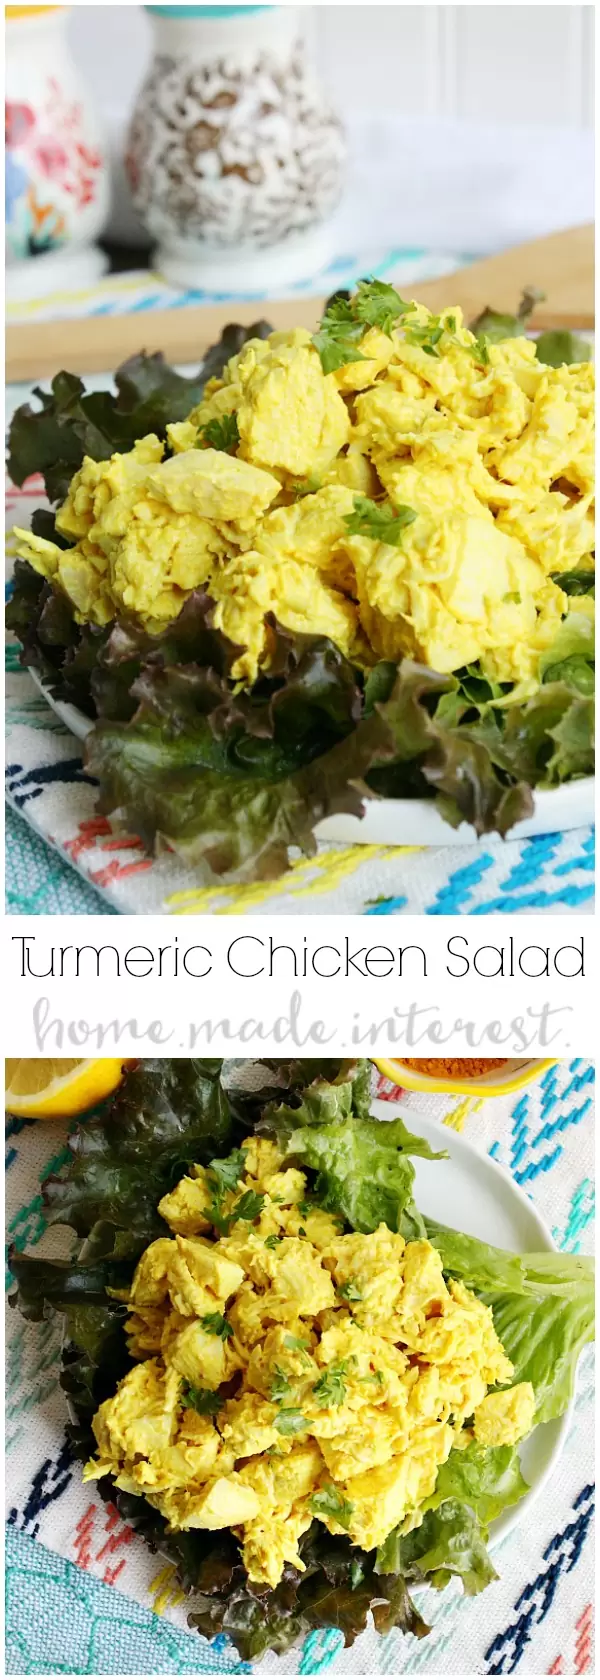 This easy turmeric chicken salad is full of flavor and healthy benefits like antioxidants. It is a healthy low carb lunch or dinner recipe that you can make ahead of time. 